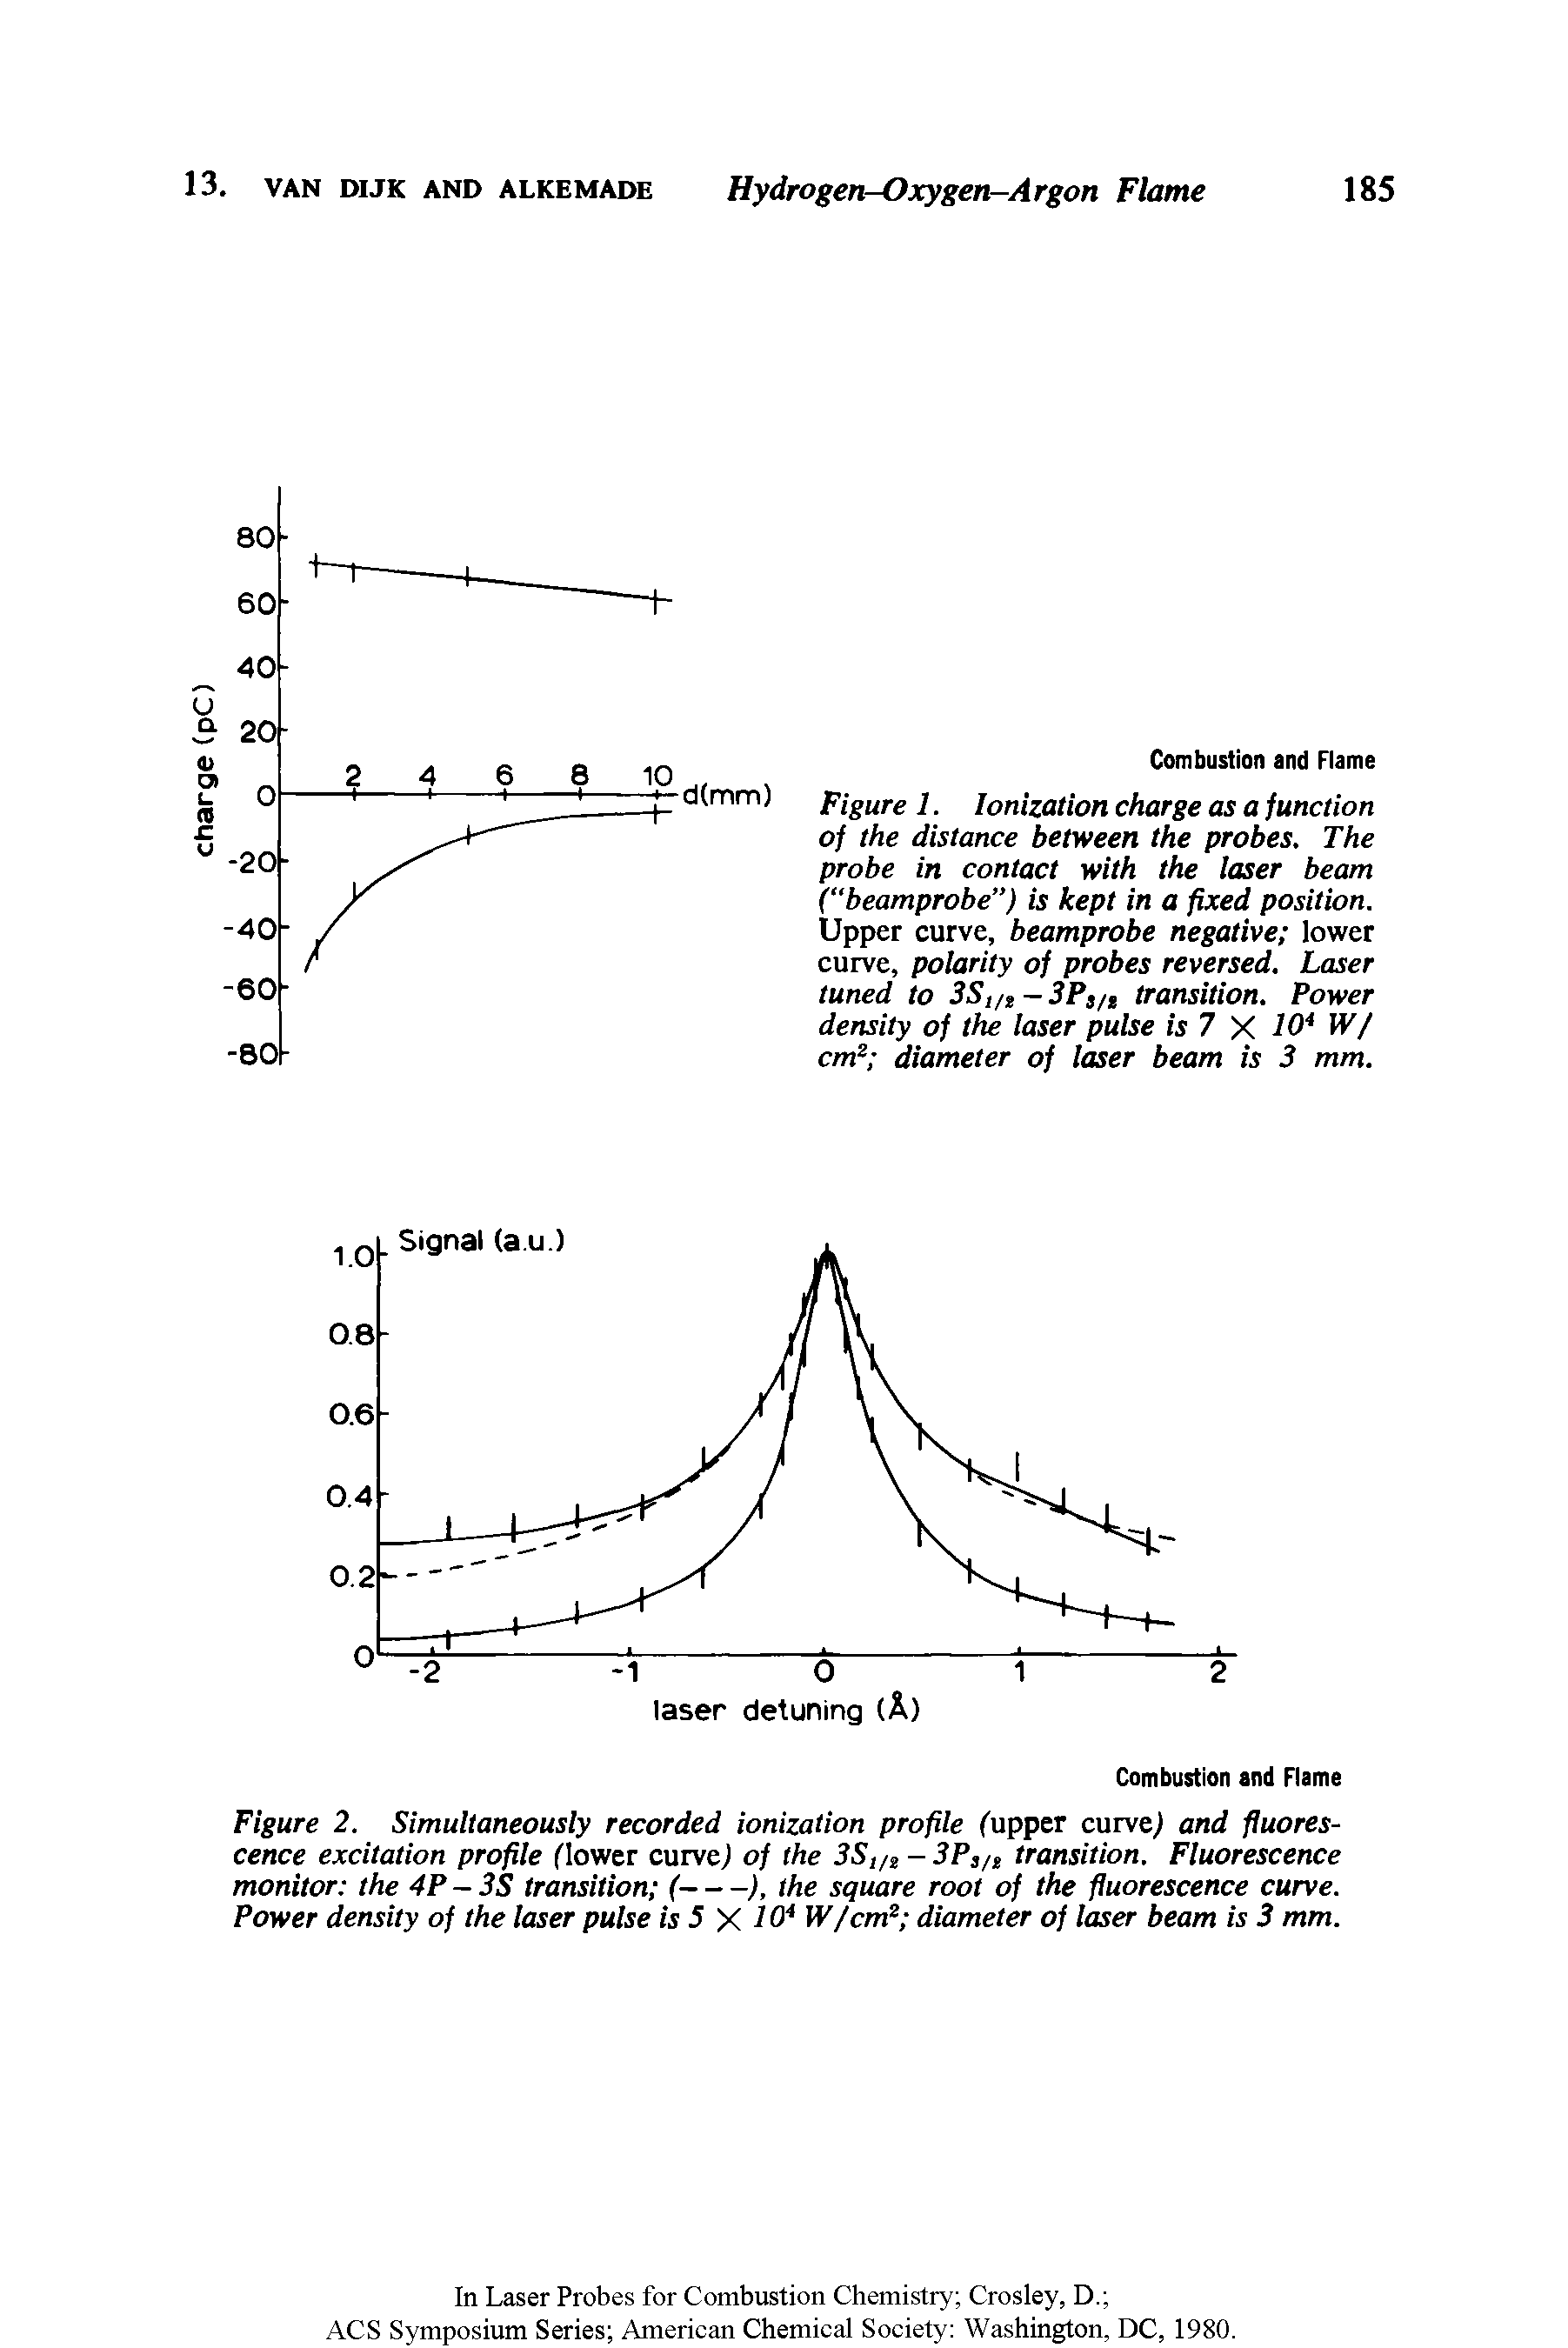 Figure 2. Simultaneously recorded ionization profile (upper curve,) and fluorescence excitation profile (lower curve,) of the 3S,/2 -3Ps/l transition. Fluorescence...